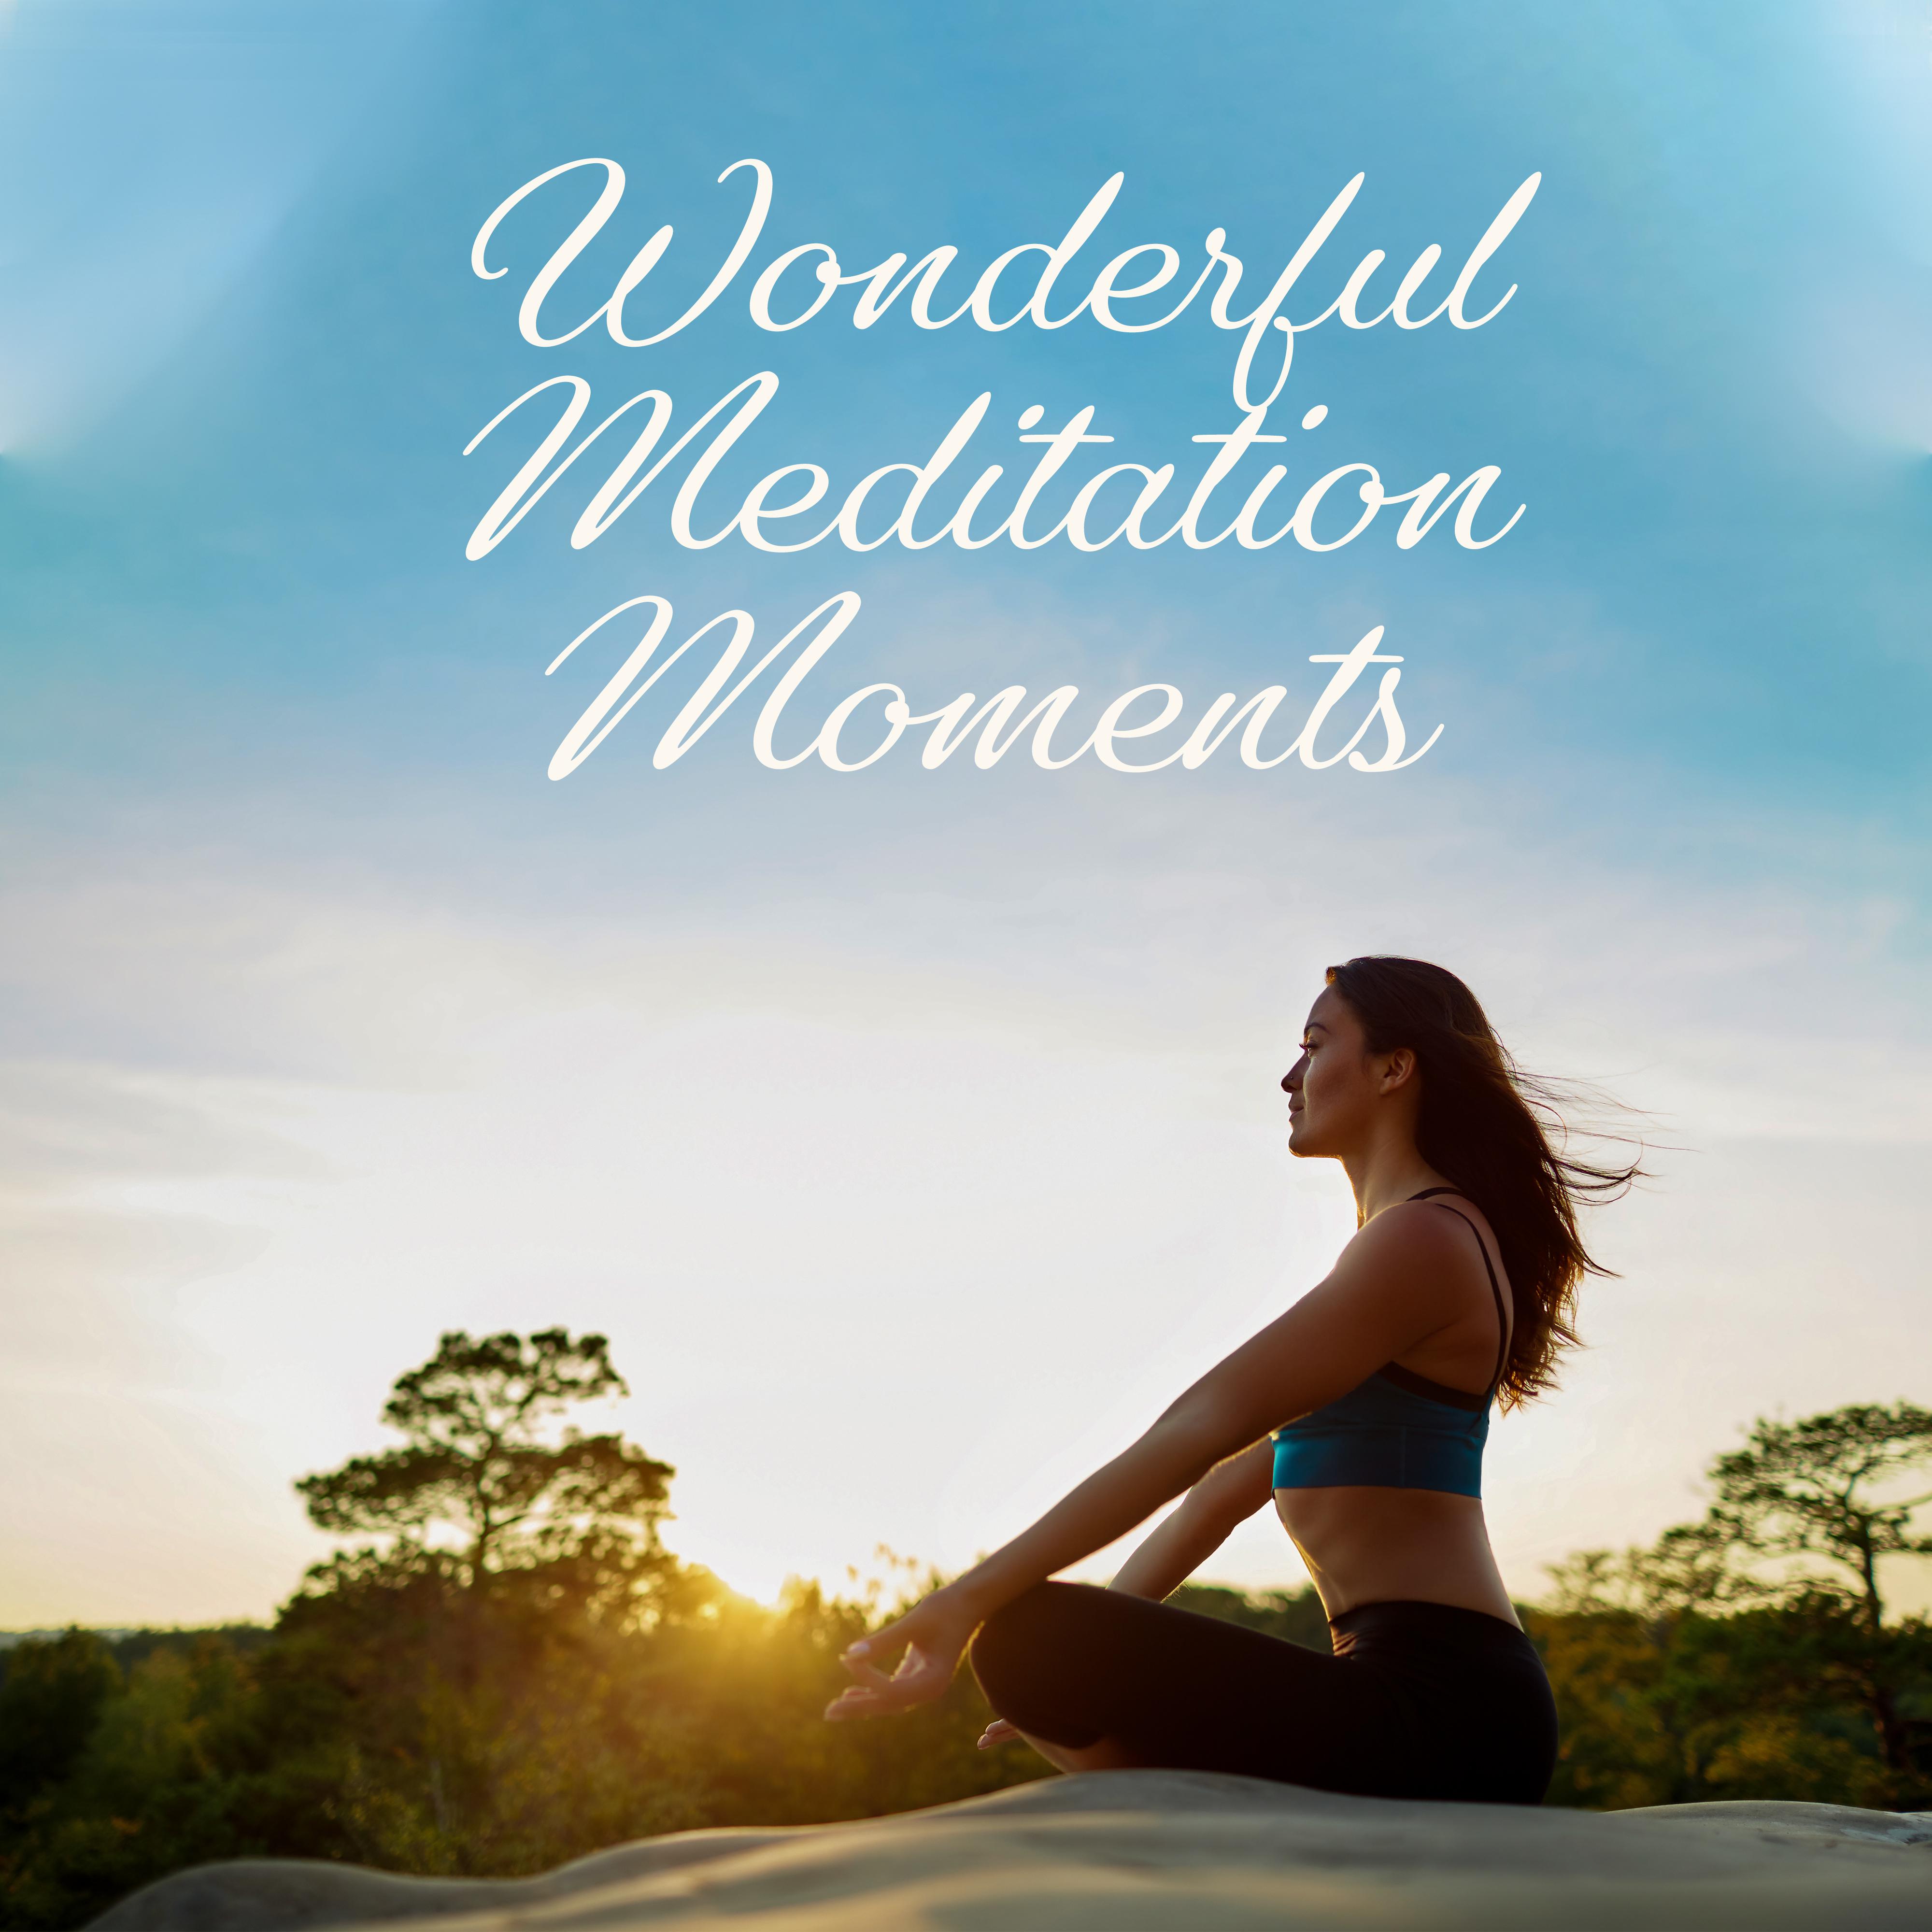 Wonderful Meditation Moments: 2019 Deep Ambient New Age Music for Pure Yoga & Relaxation, Inner Energy Increase, Chakra Healing Sounds